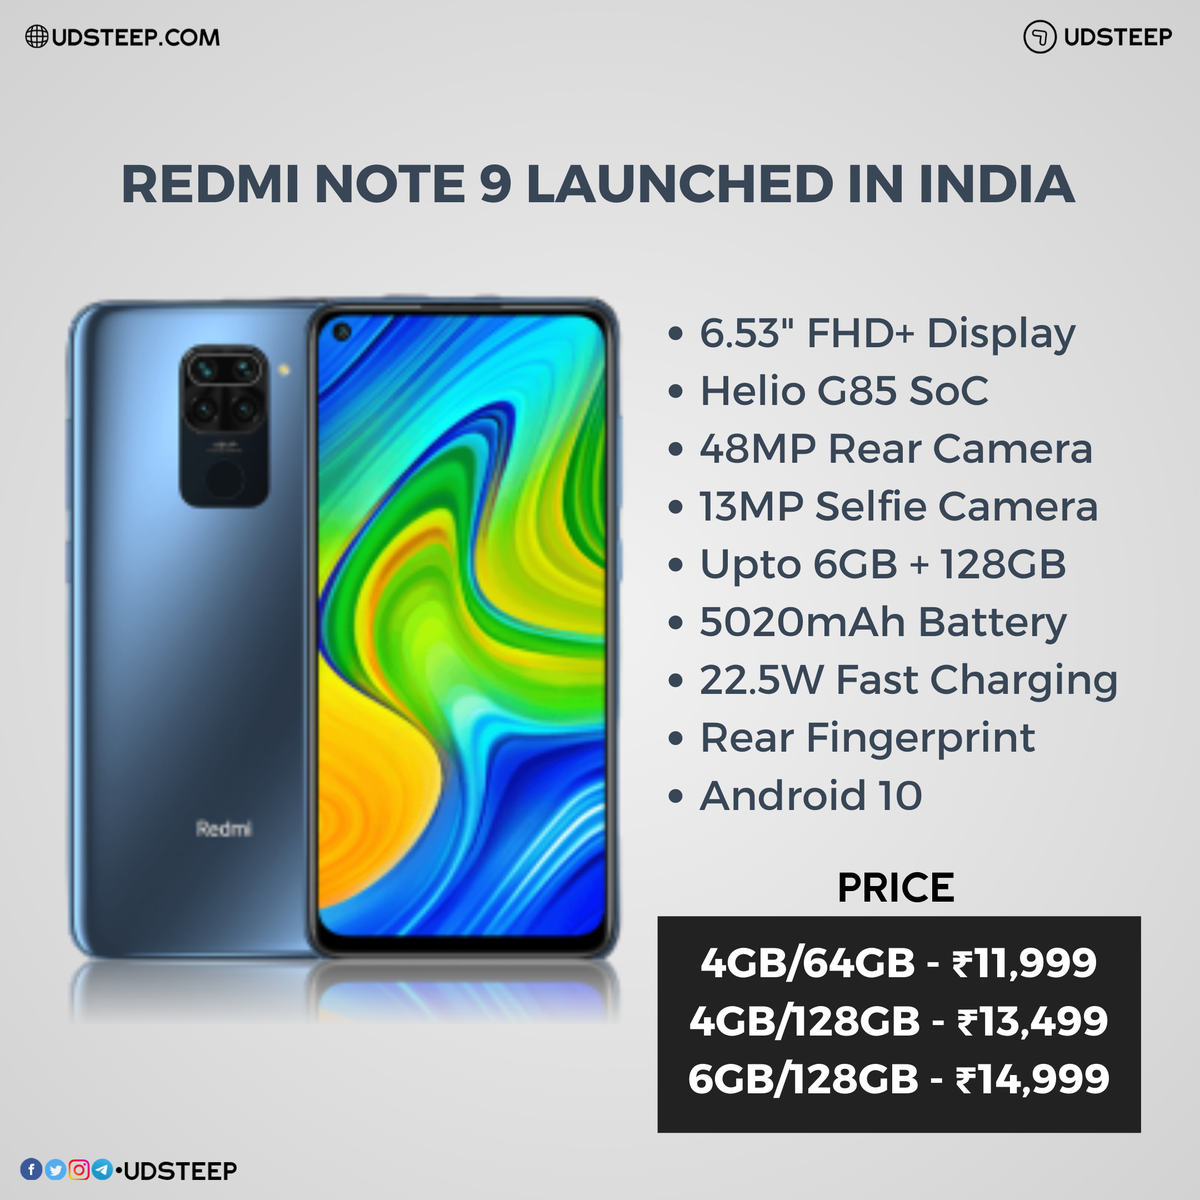 Redmi Note 9 Launched in India and will be available on 24 July 12:00PM at Mi Website, Mi Stores, Mi Home, and Amazon.

#Redmi #RedmiNote9 #Note9 #SmartPhone #Mobile #Phone #Xiaomi #Mi #RedmiNote #Note #AmazonINDIA #MIStore #MiHome #MiFAn
#UDSTEEP